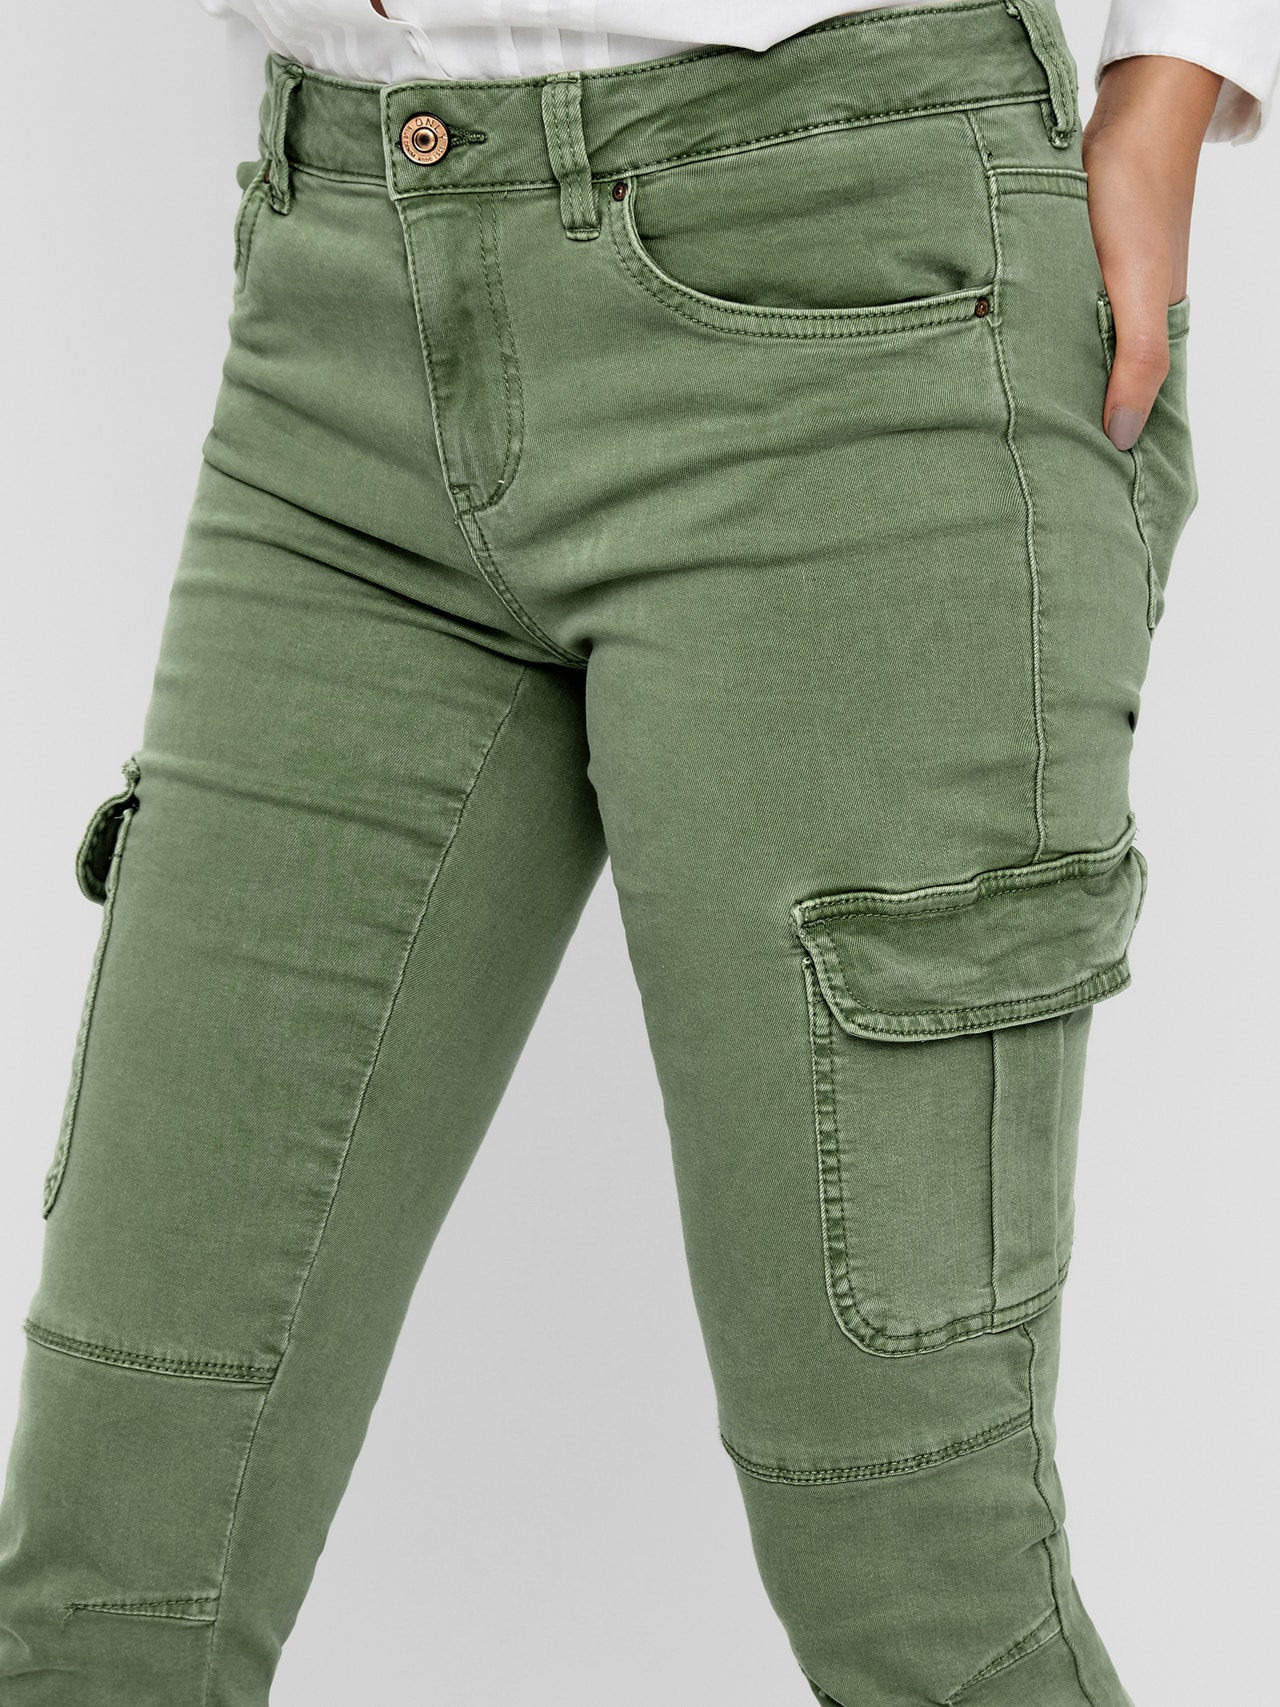 ONLY Pantalons Slim Fit Taille moyenne Élastique -Oil Green - 15170889